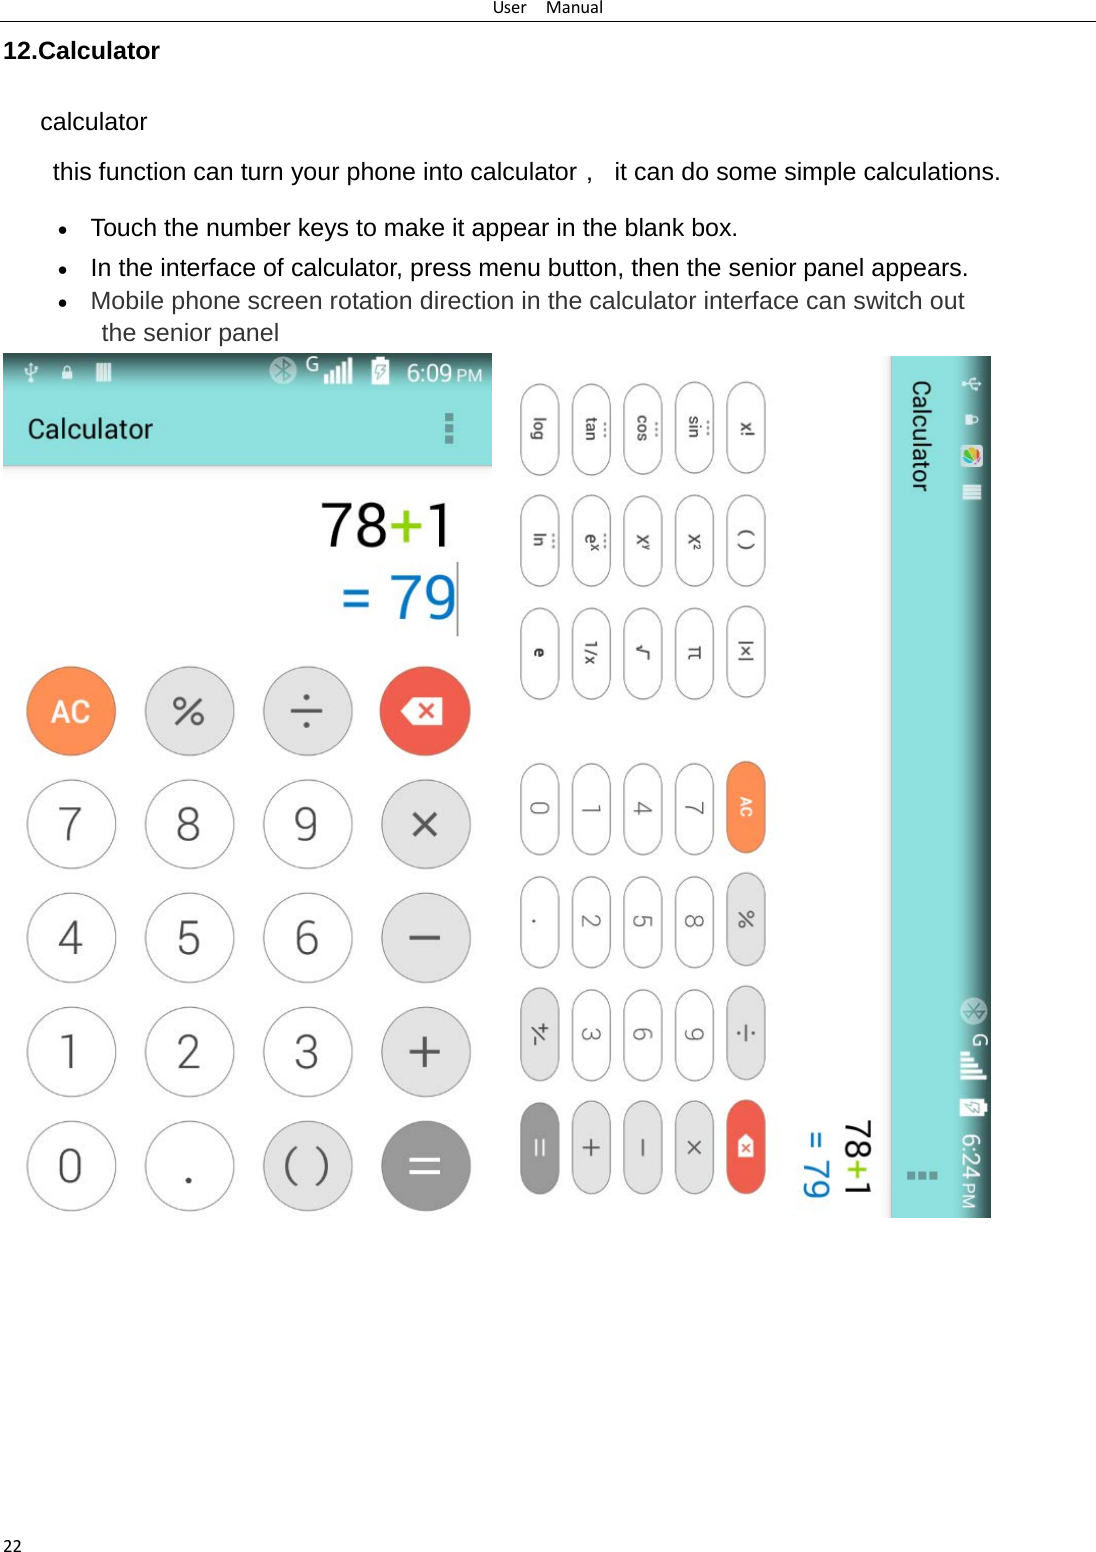 User  Manual 22 12.Calculator calculator this function can turn your phone into calculator， it can do some simple calculations. • Touch the number keys to make it appear in the blank box. • In the interface of calculator, press menu button, then the senior panel appears. • Mobile phone screen rotation direction in the calculator interface can switch out the senior panel        